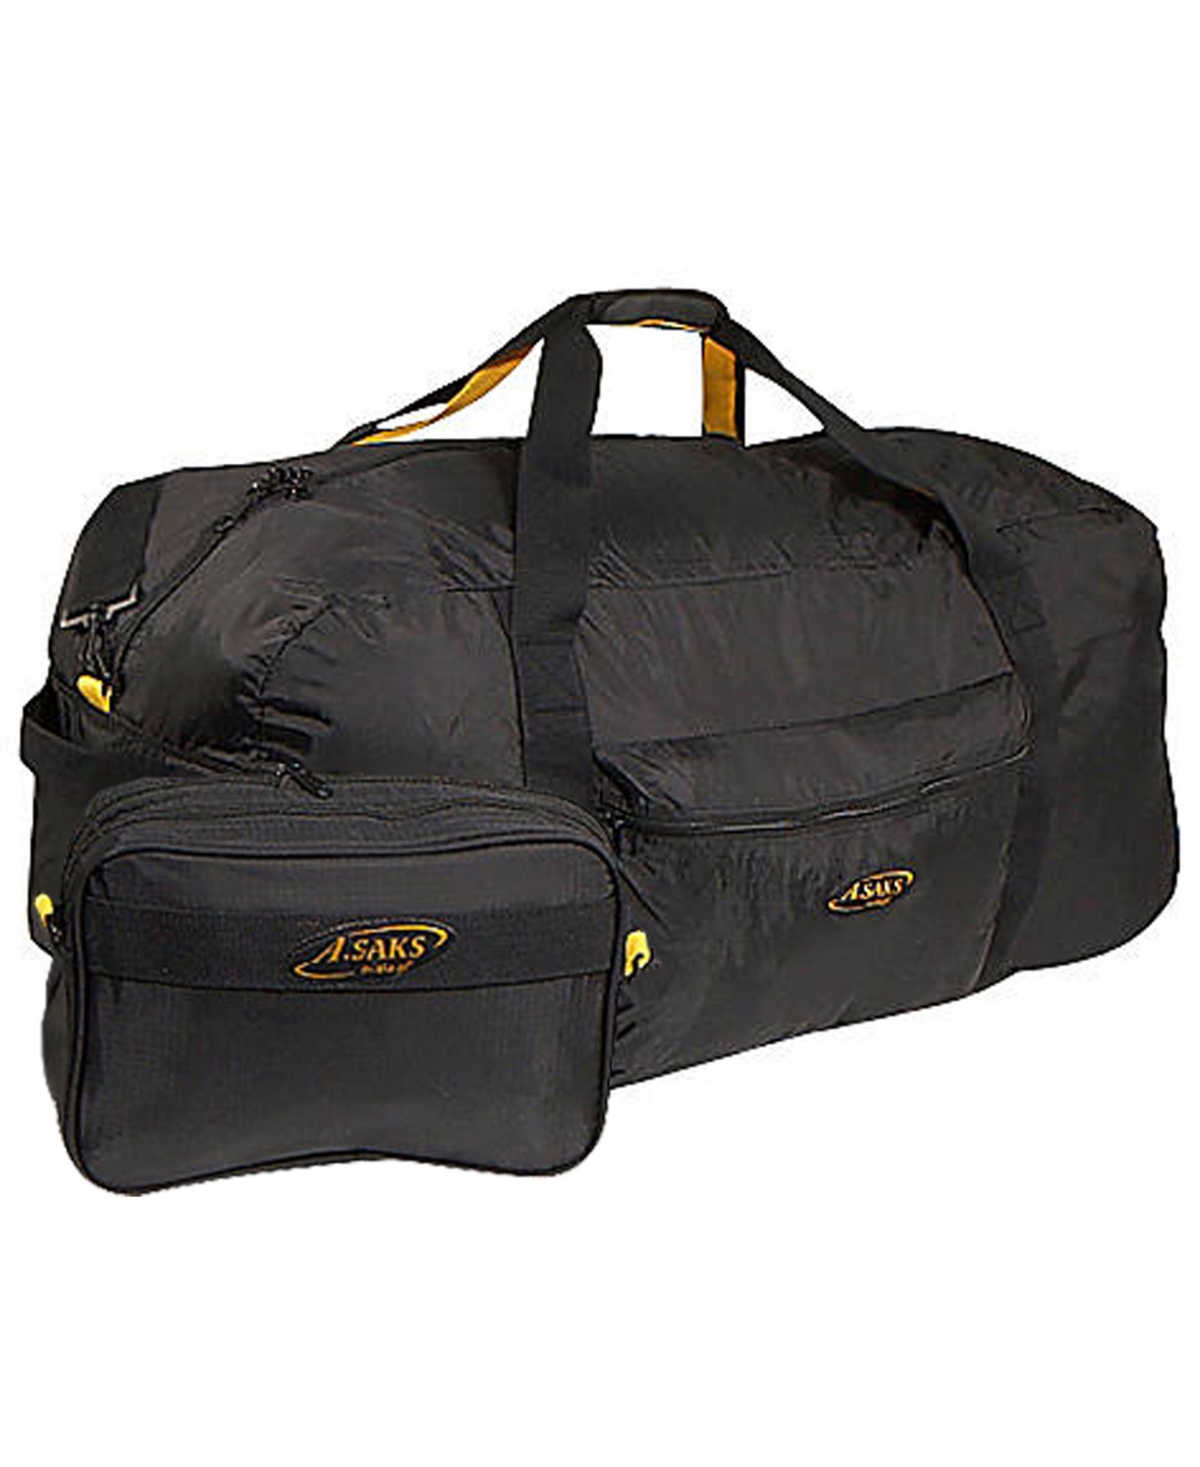 36" Duffel Bag with Pouch - Black